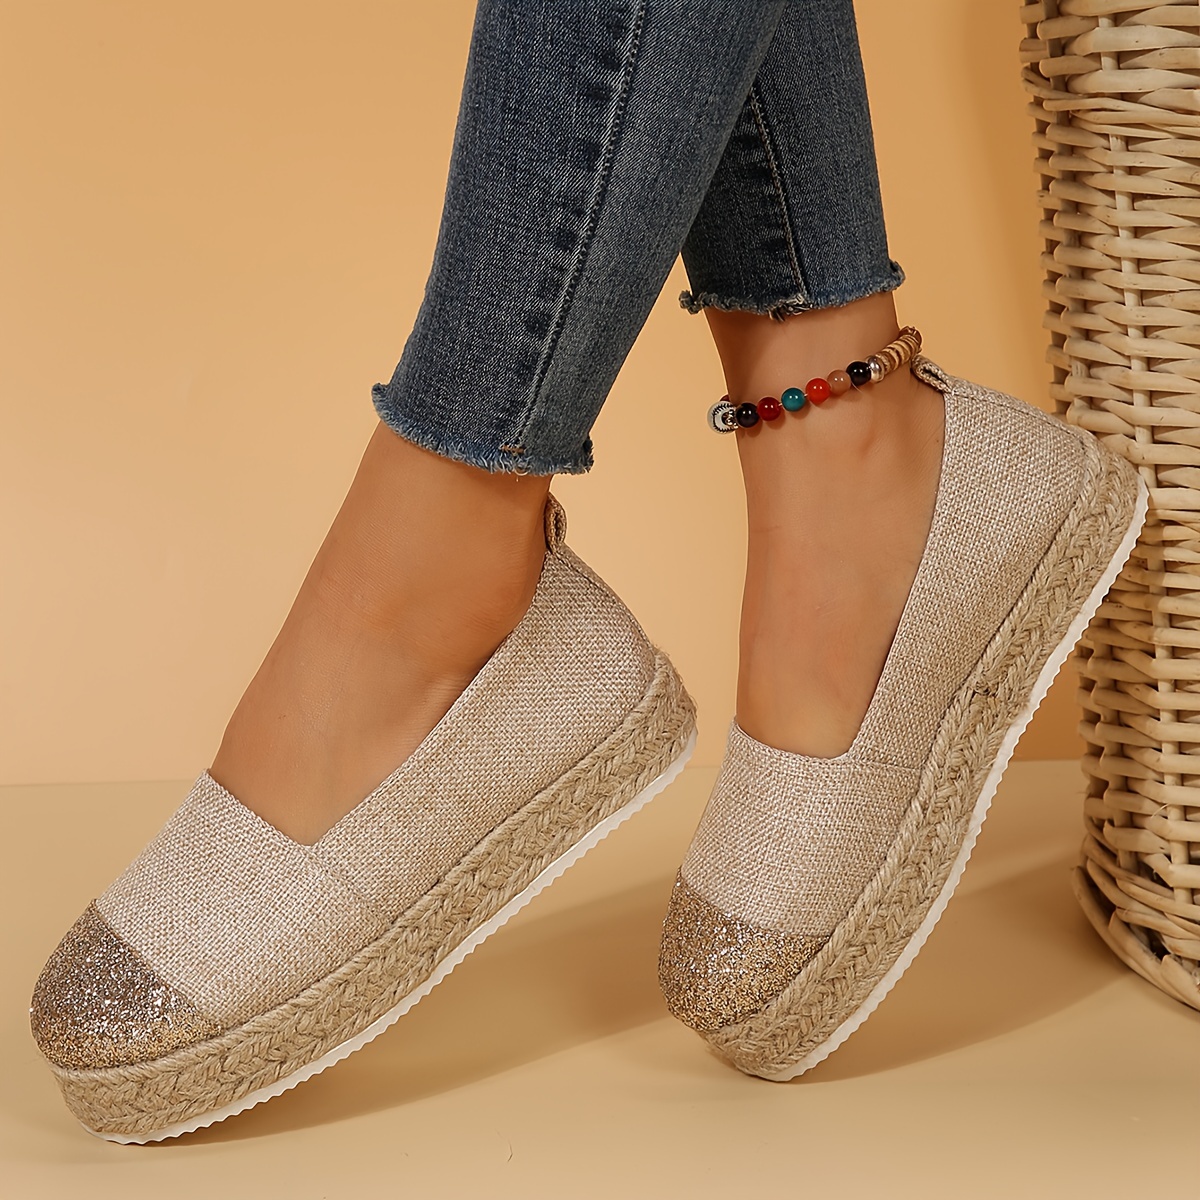 Silver Glitter Loafers